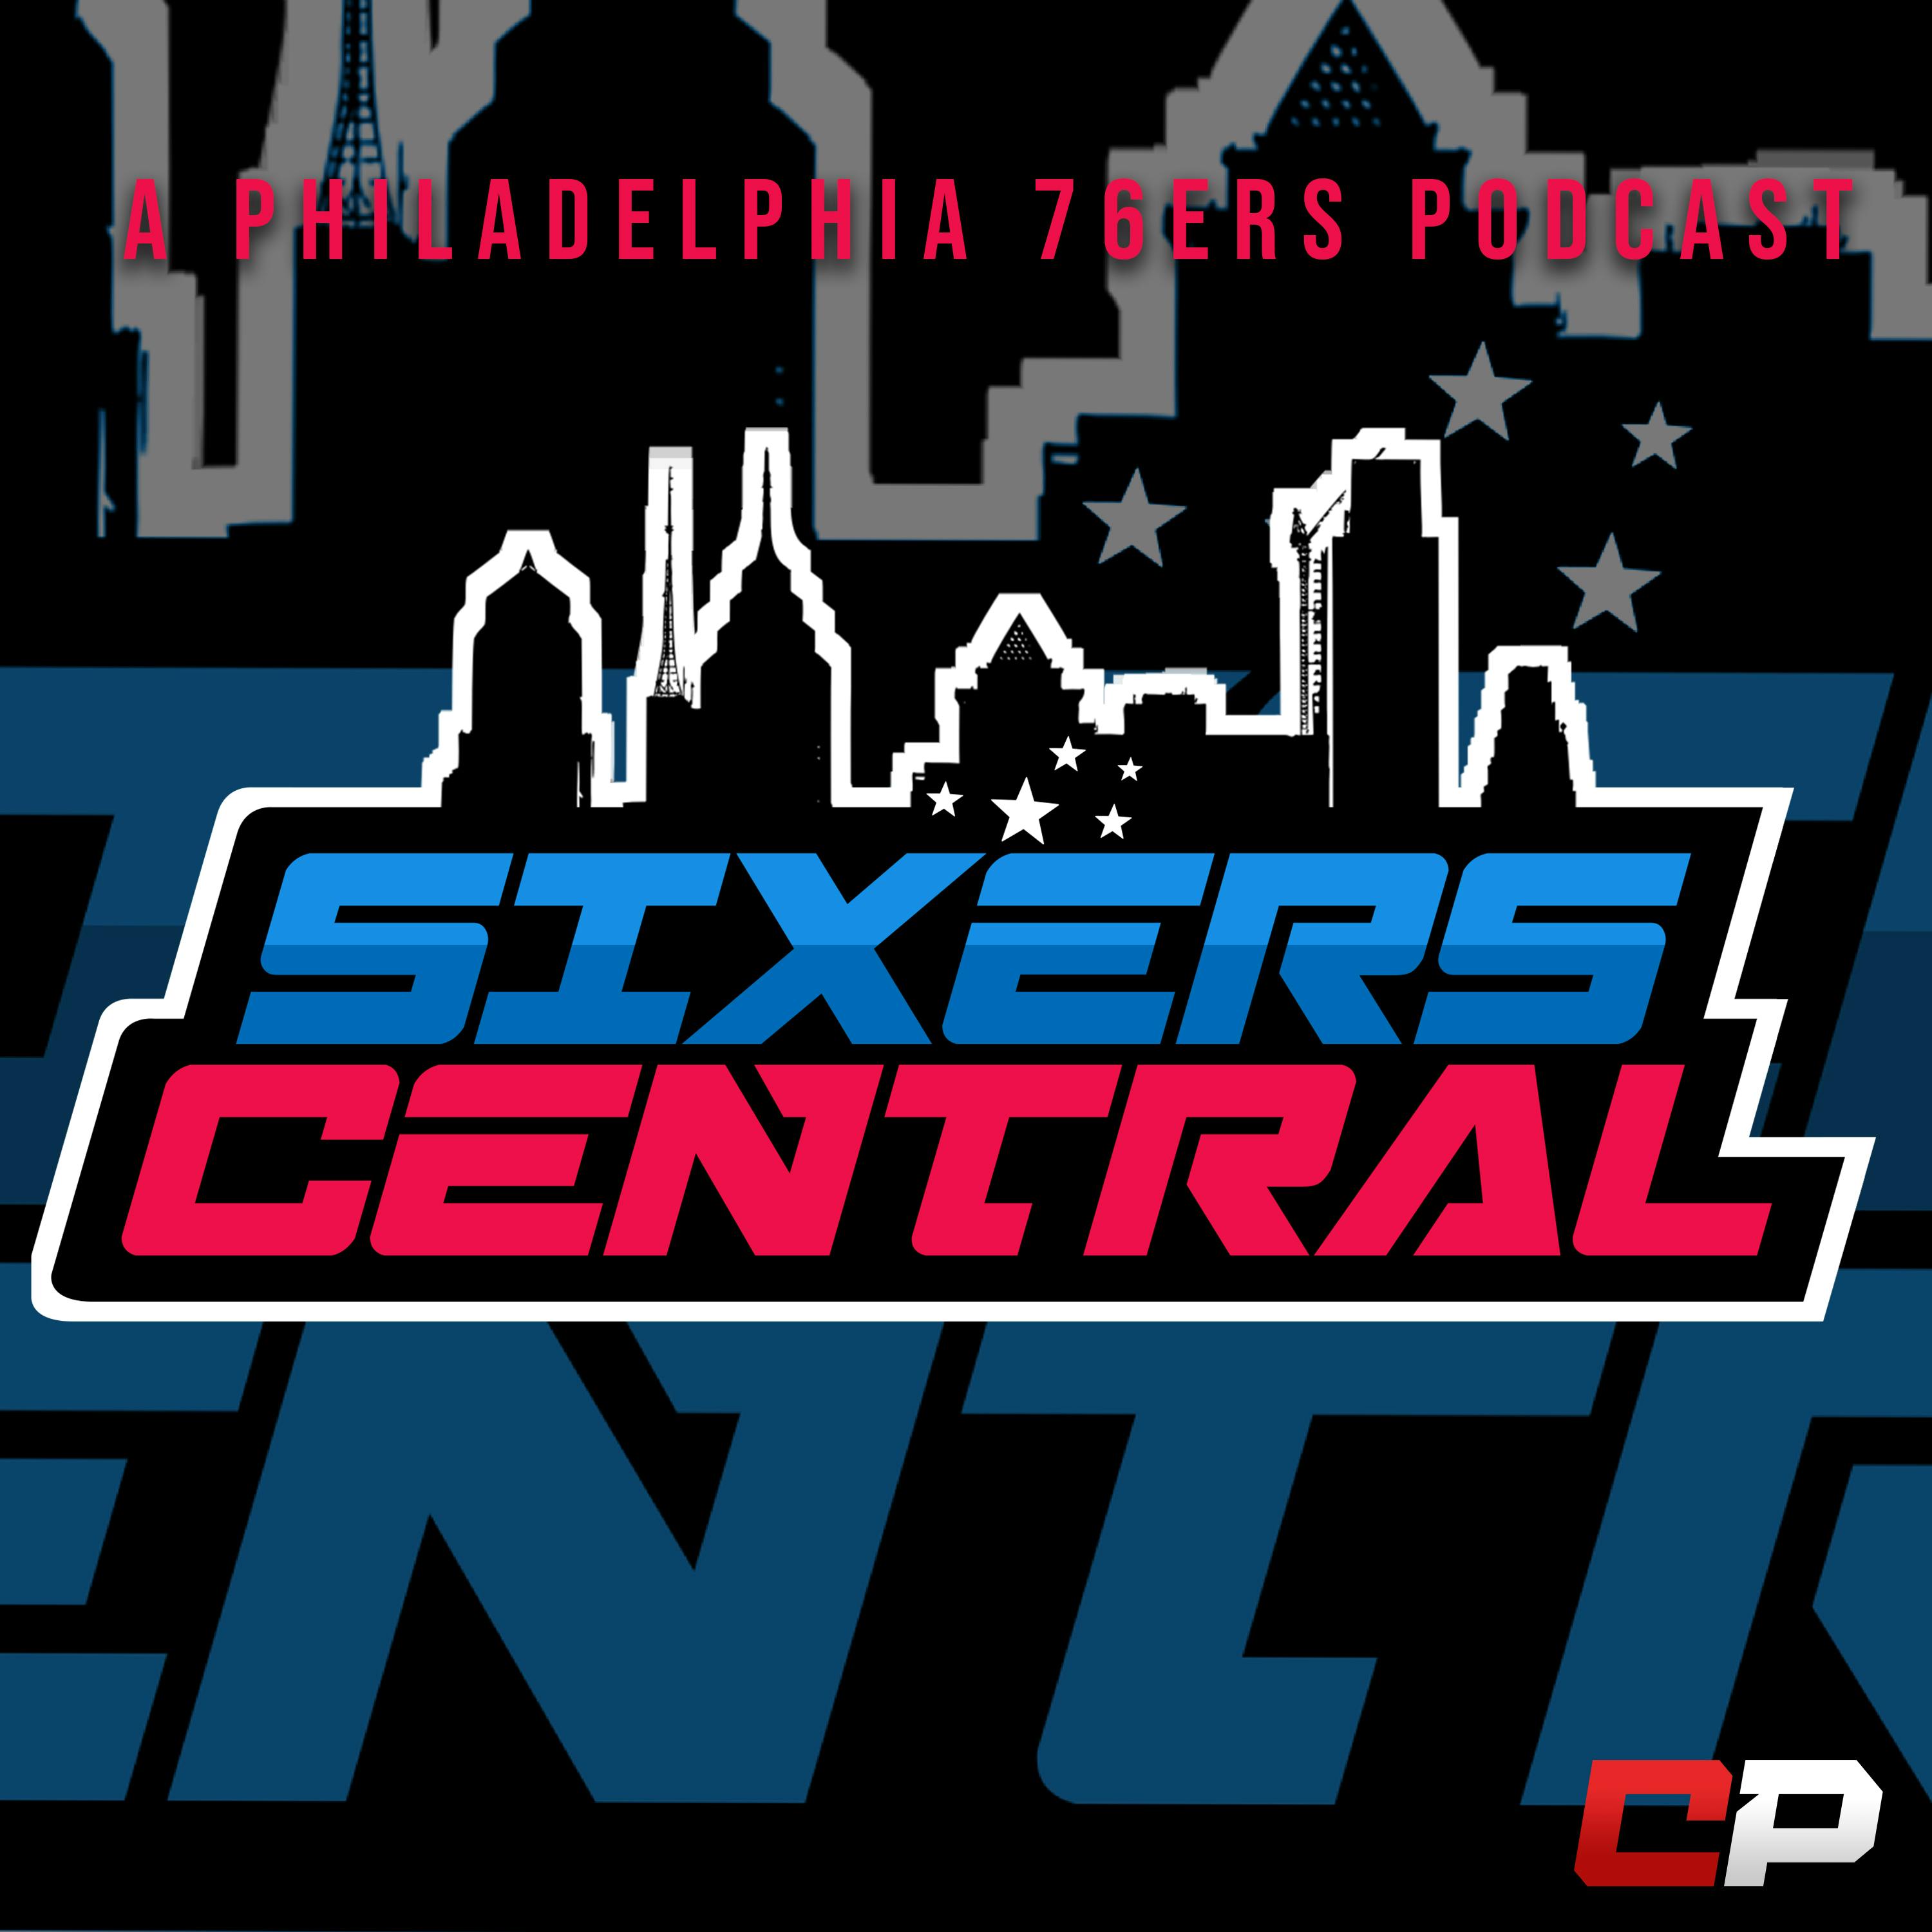 Sixers Central